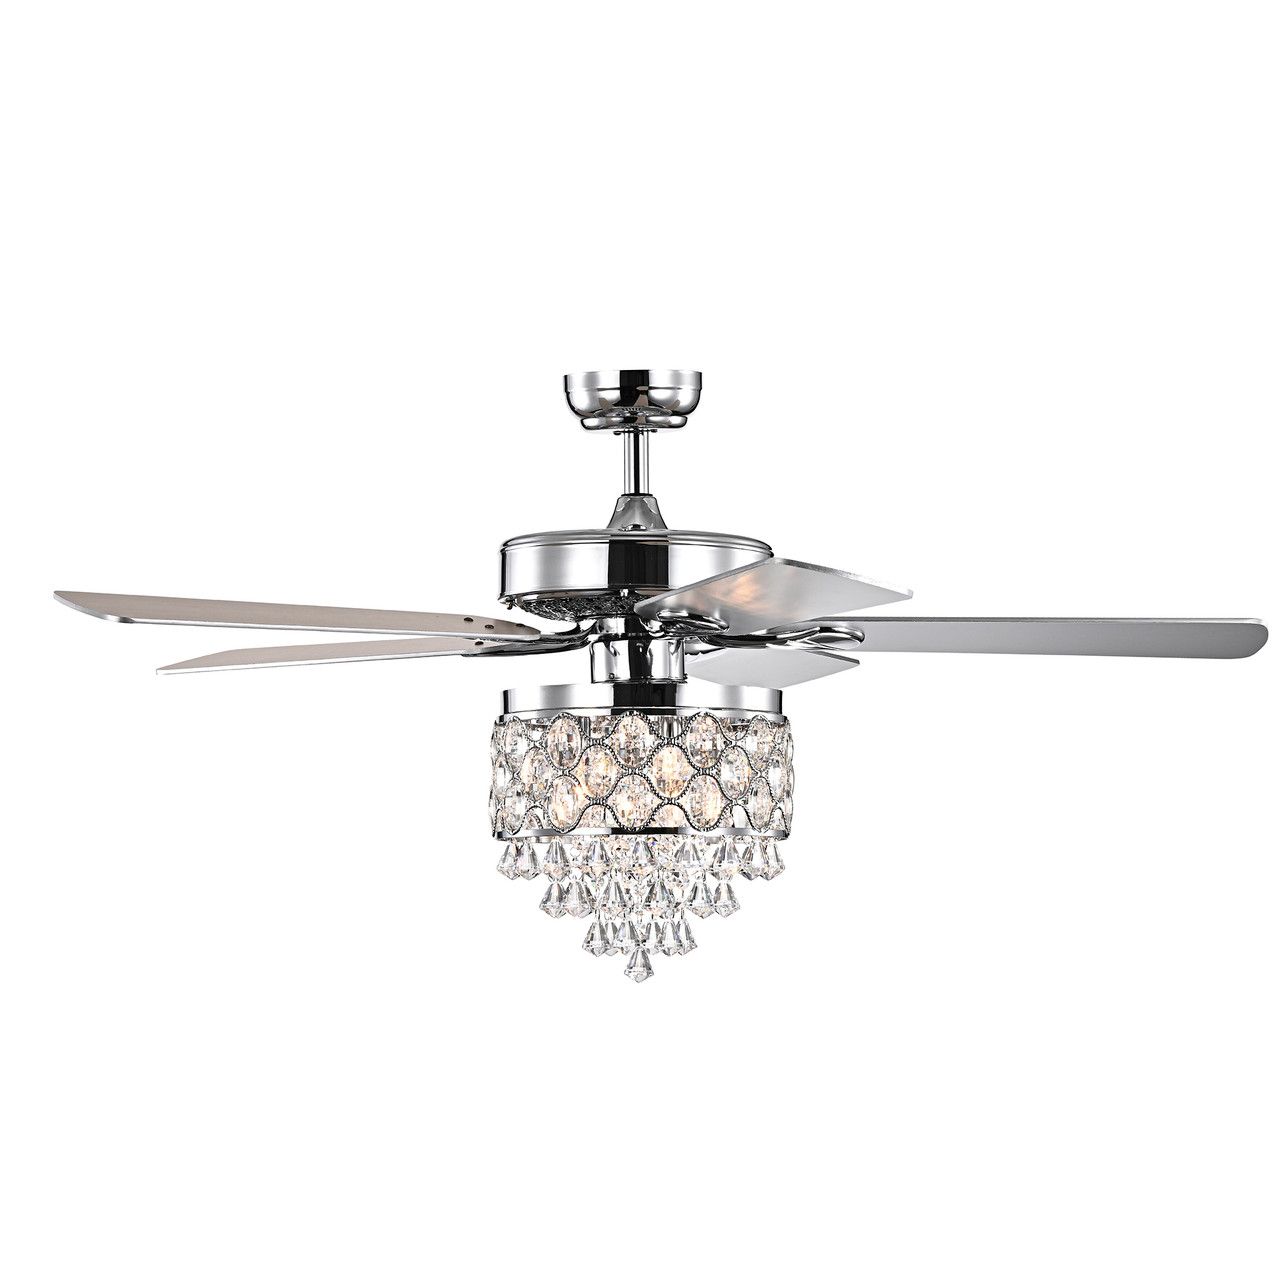 WAREHOUSE OF TIFFANY'S CFL-8458REMO/CH Jay 52 in. 3-Light Indoor Chrome Finish Remote Controlled Ceiling Fan with Light Kit